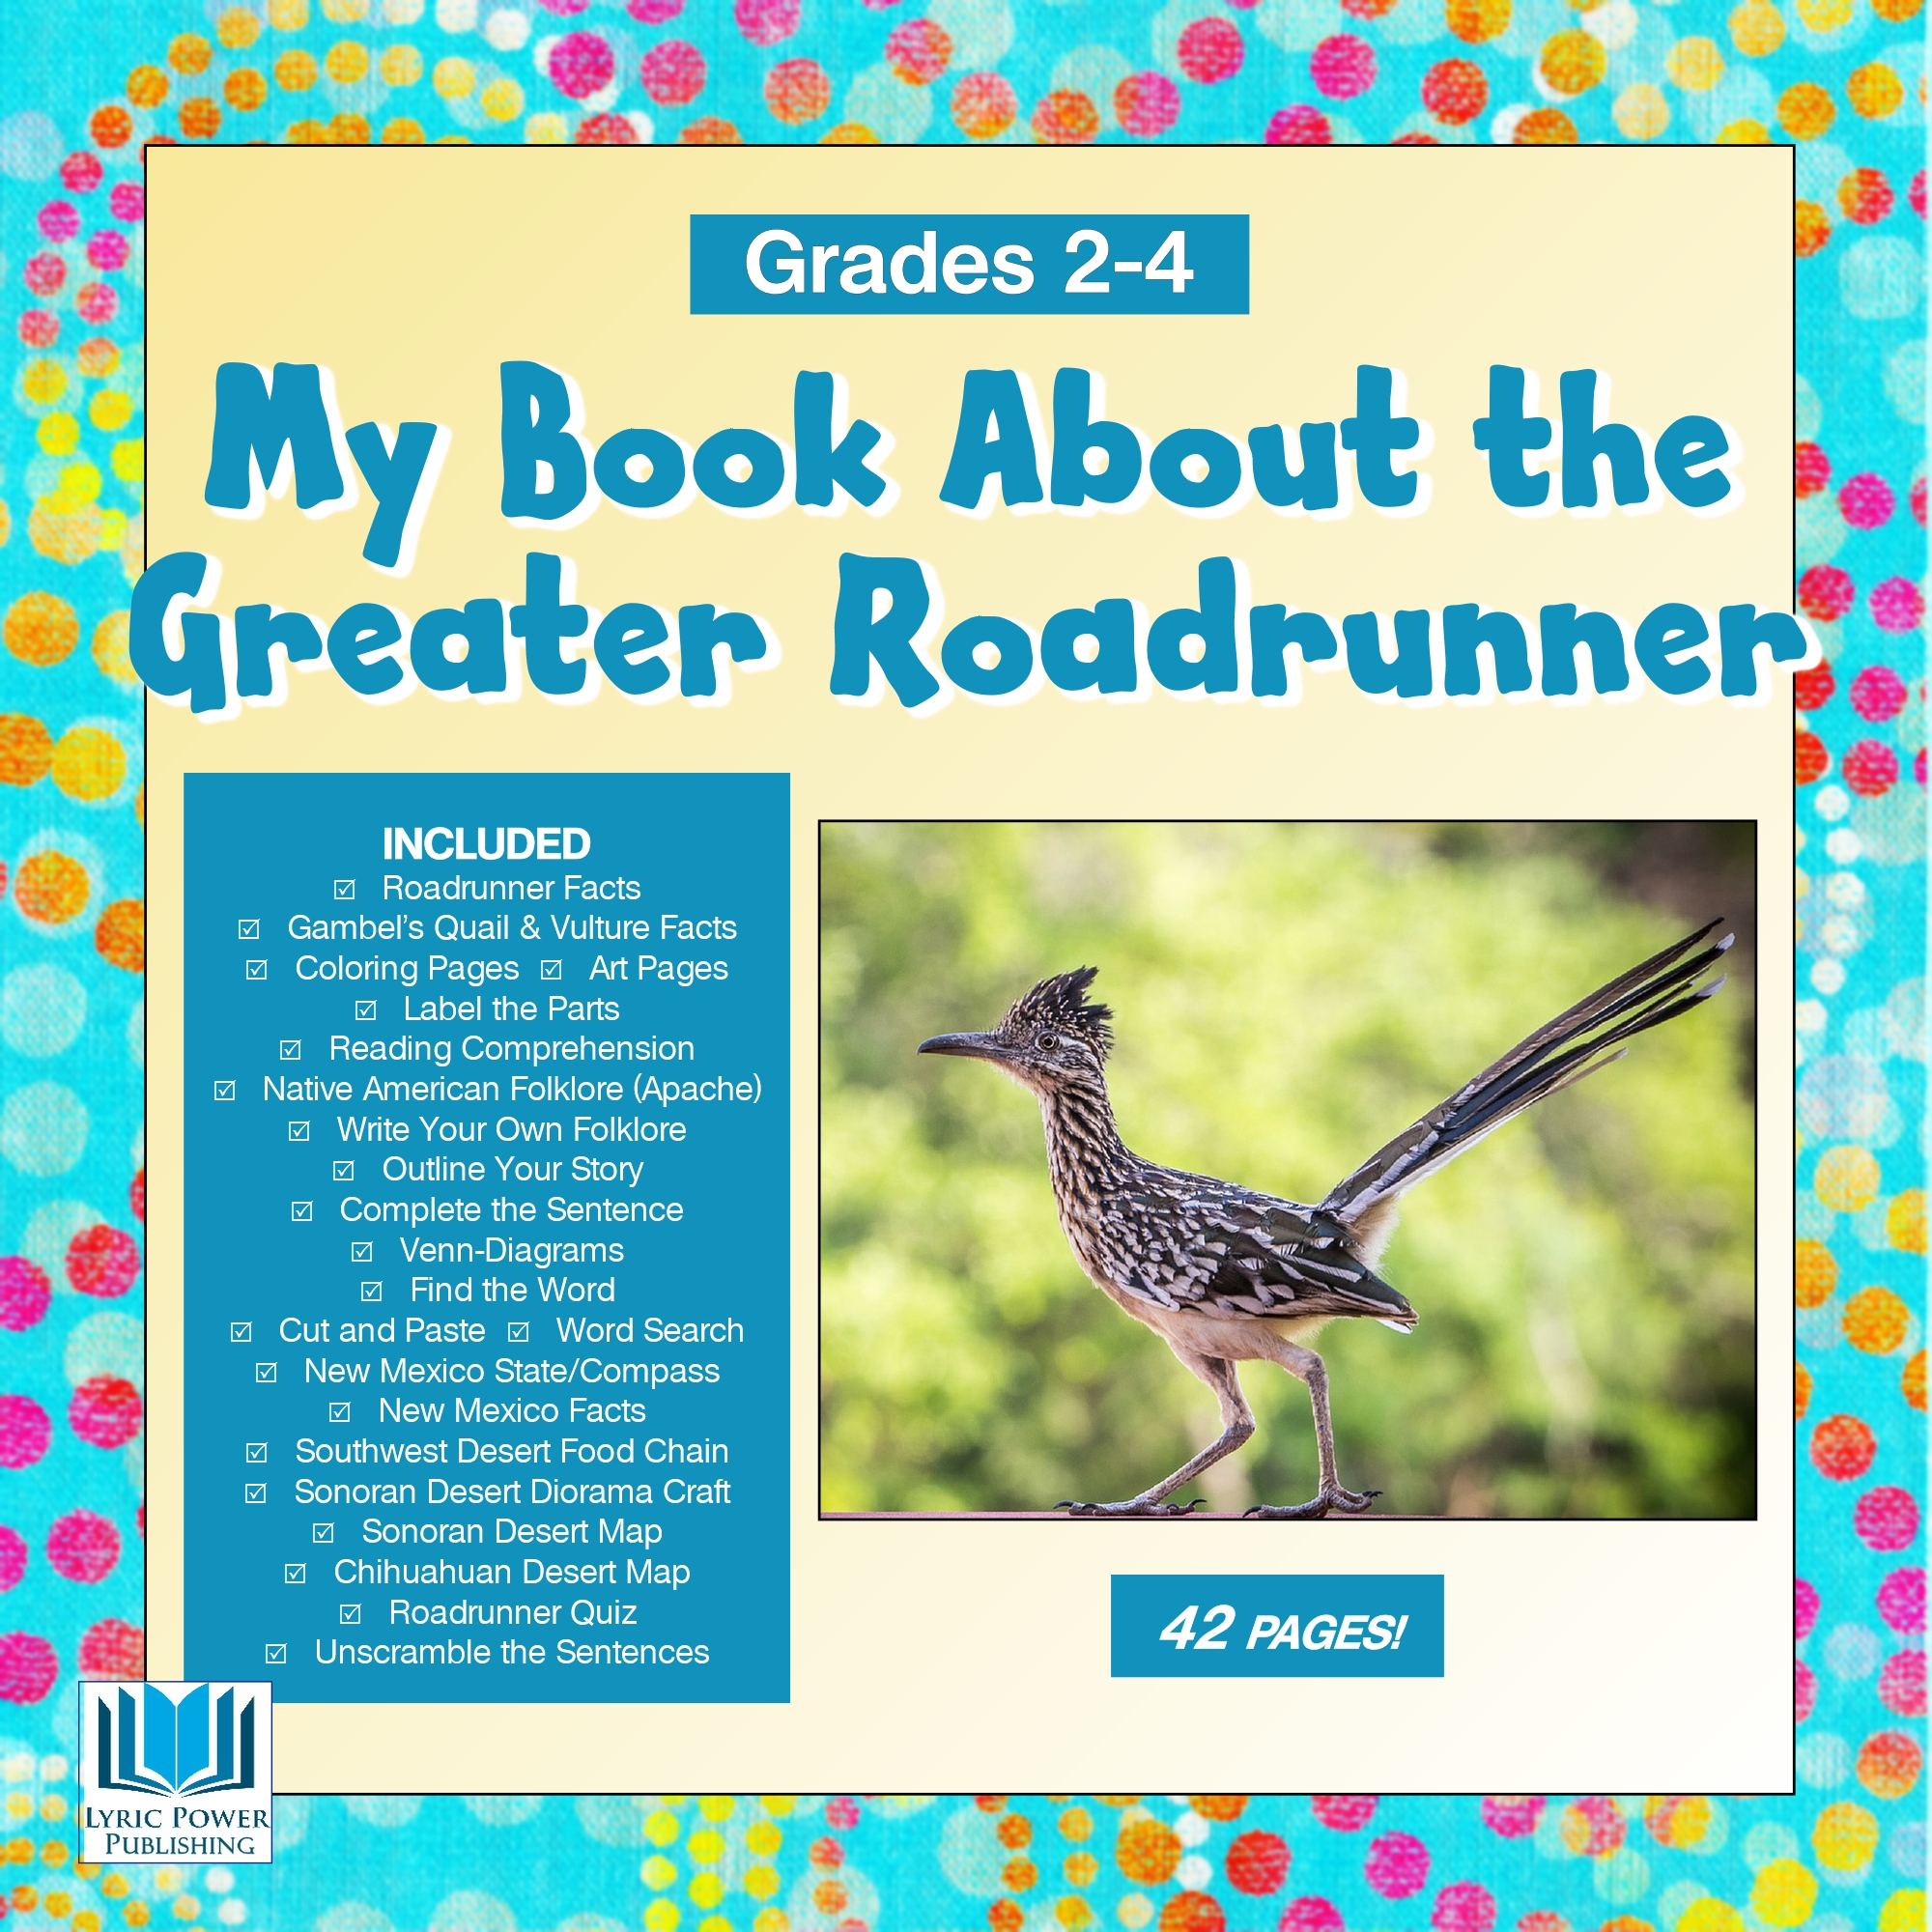 a turquoise and yellow book cover with an image of the Greater Roadrunner